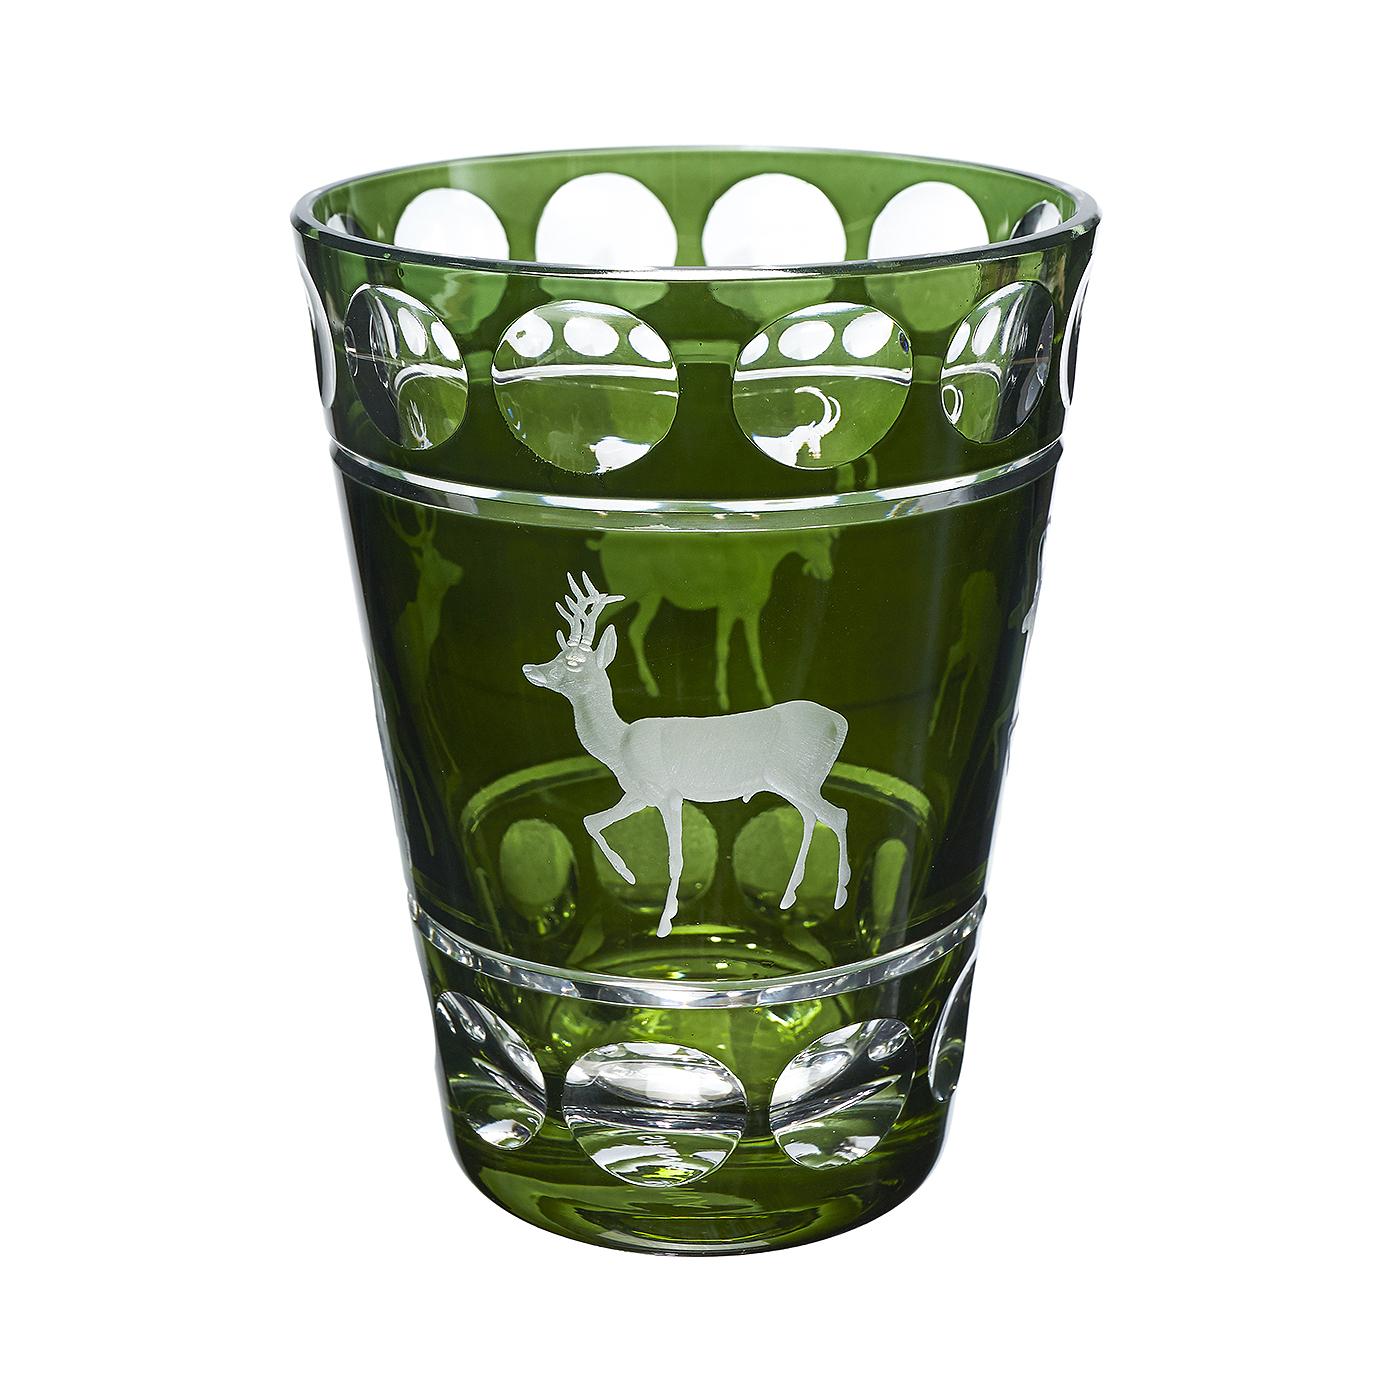 Handblown crystal vase in green glass with hand-edged hunting scene. The decor is hunting decor with four hand-engraved animals in naturalistic style. Completely handblown and hand-engraved in Bavaria Germany. The glass here shown comes in dark